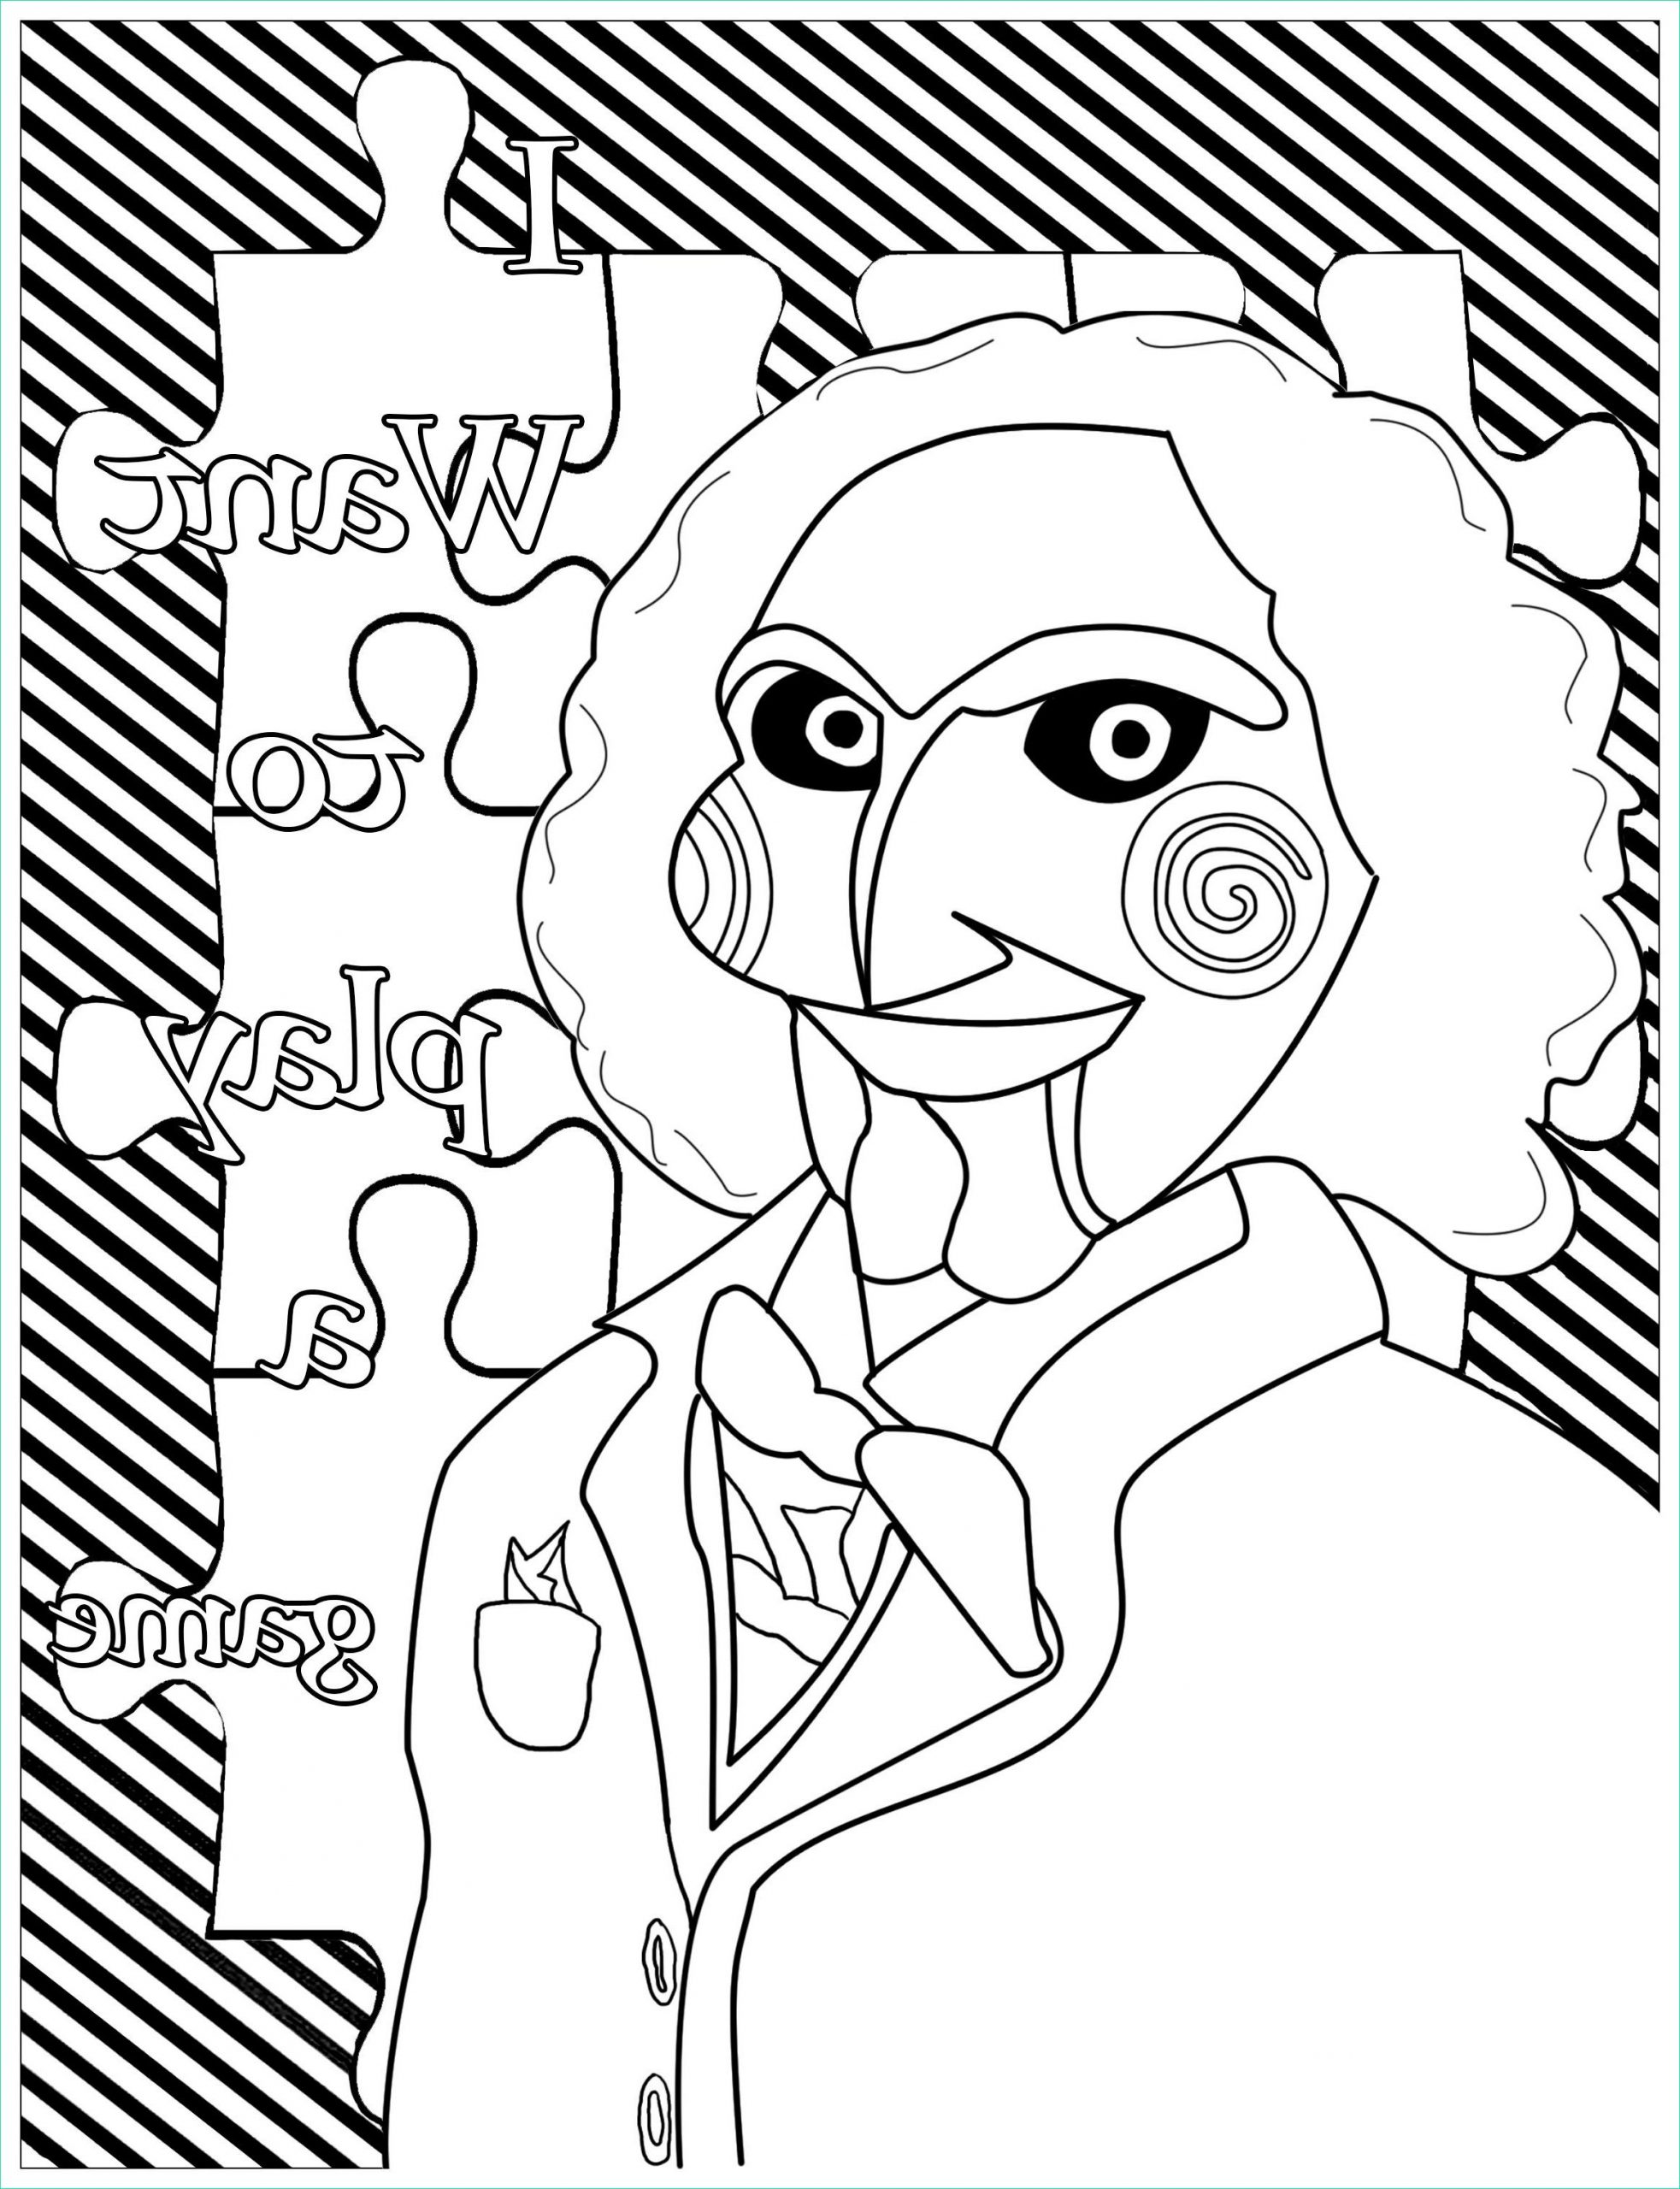 image=coloriages halloween coloriage jigsaw billy la poupee 1